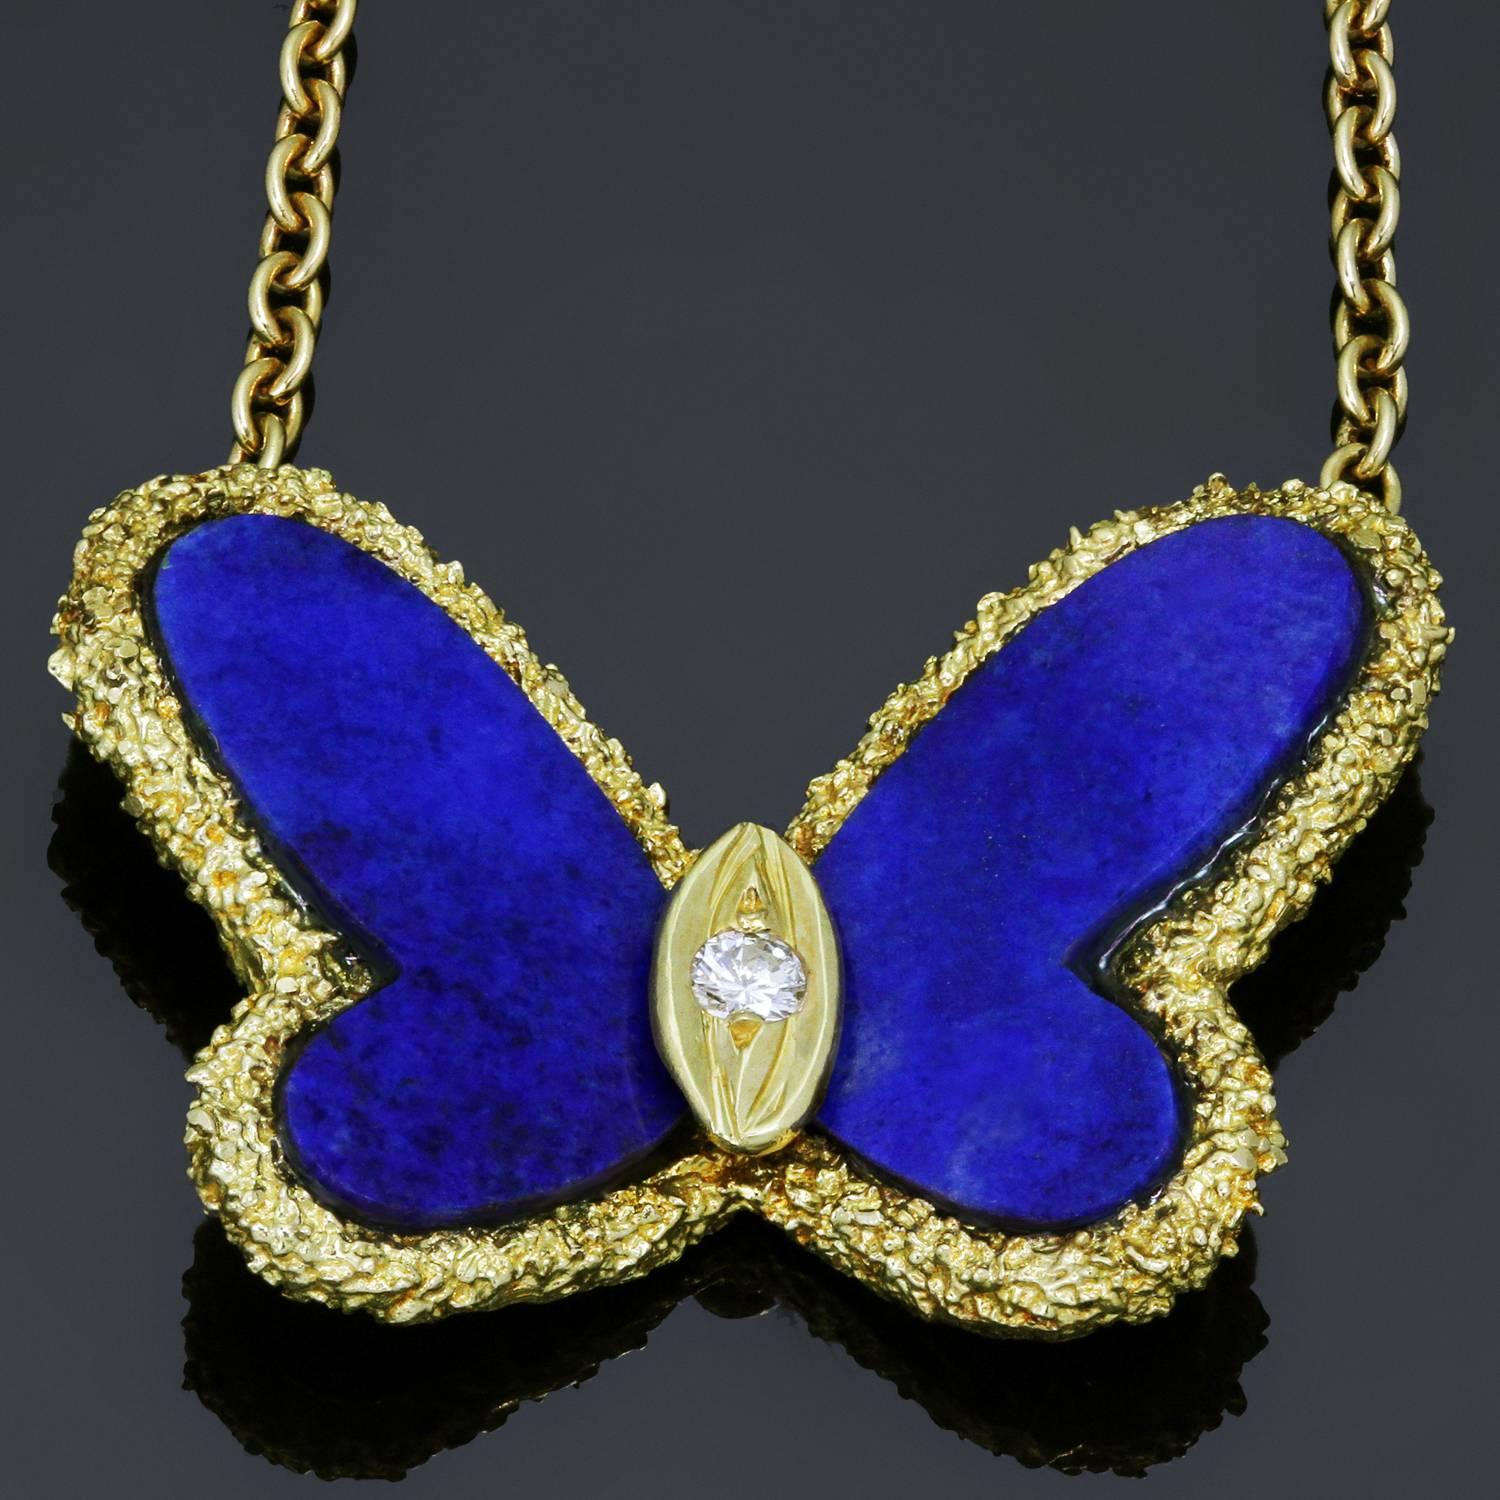 This stunning vintage Van Cleef & Arpels butterfly necklace from the timeless Flying Beauties collection is crafted in finely textured 18k yellow gold and featuring Lapis Lazuli wings and a sparkling solitaire brilliant-cut diamond of an estimated